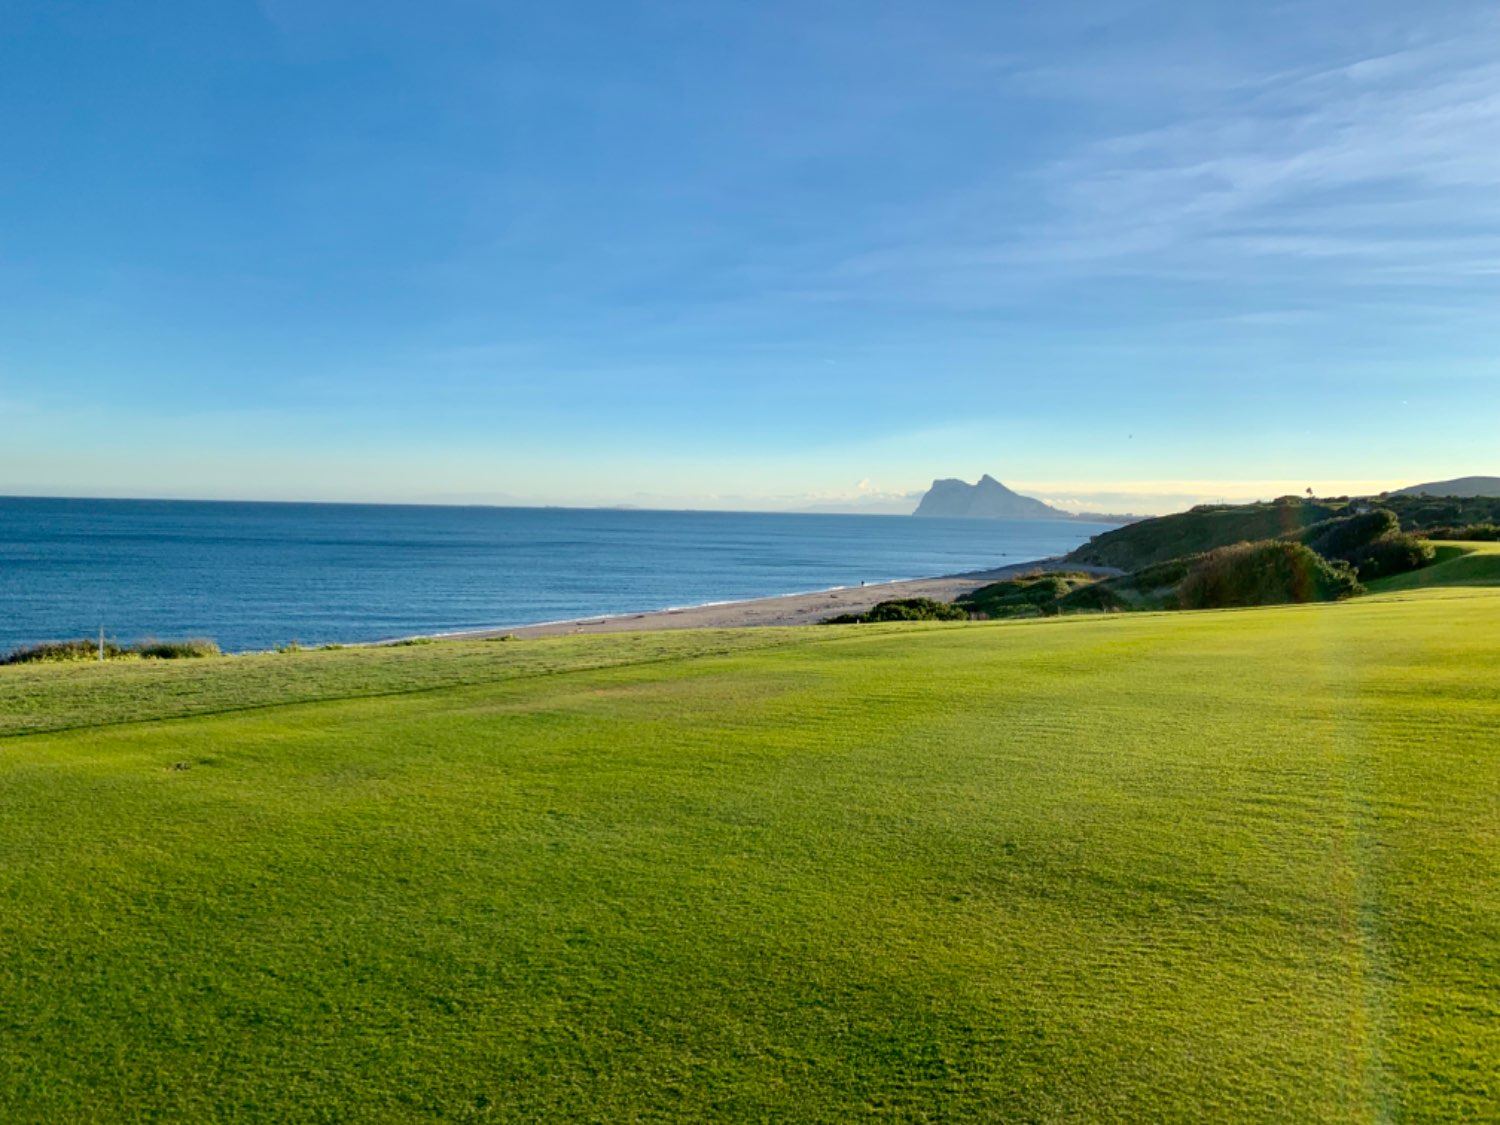 Exclusive two-bedroom apartment on the beachfront and golf course